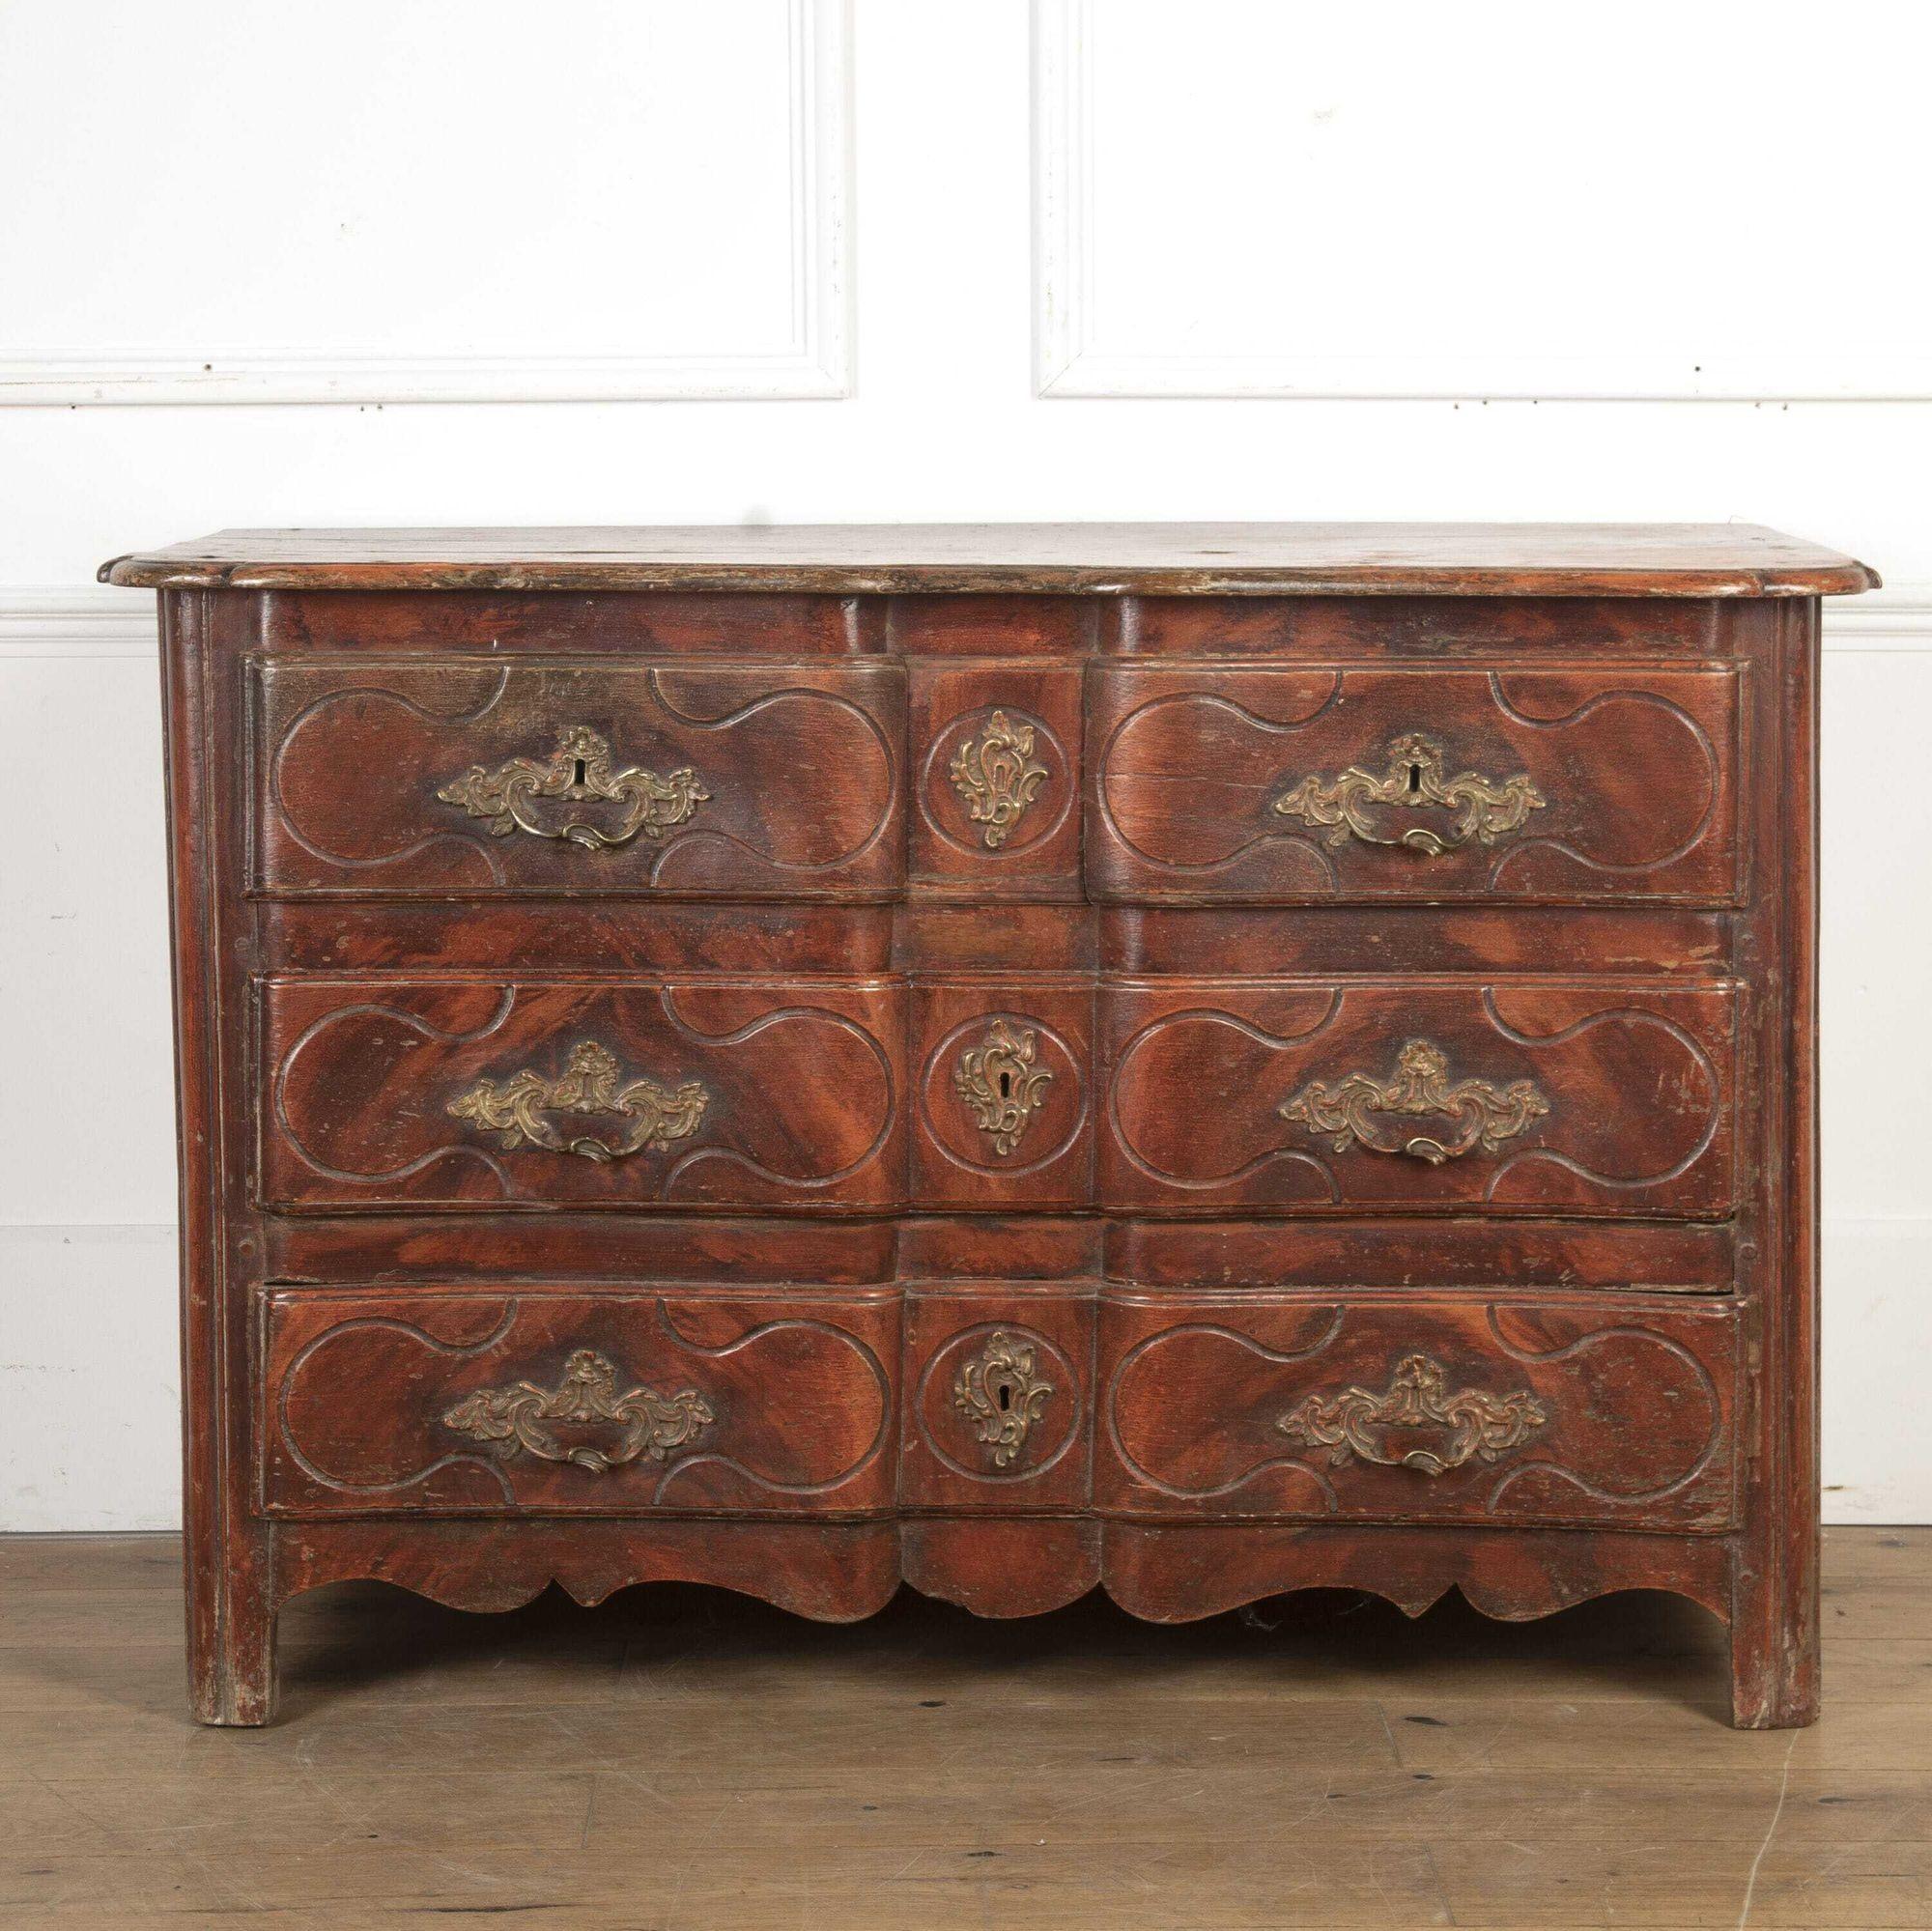 Wonderful French 18th century five-drawer commode. 
This commode features an un-usual serpentine front that offers three long drawers and two hidden central drawers, with decorative handles and escutcheons. 
This commode is raised on square feet